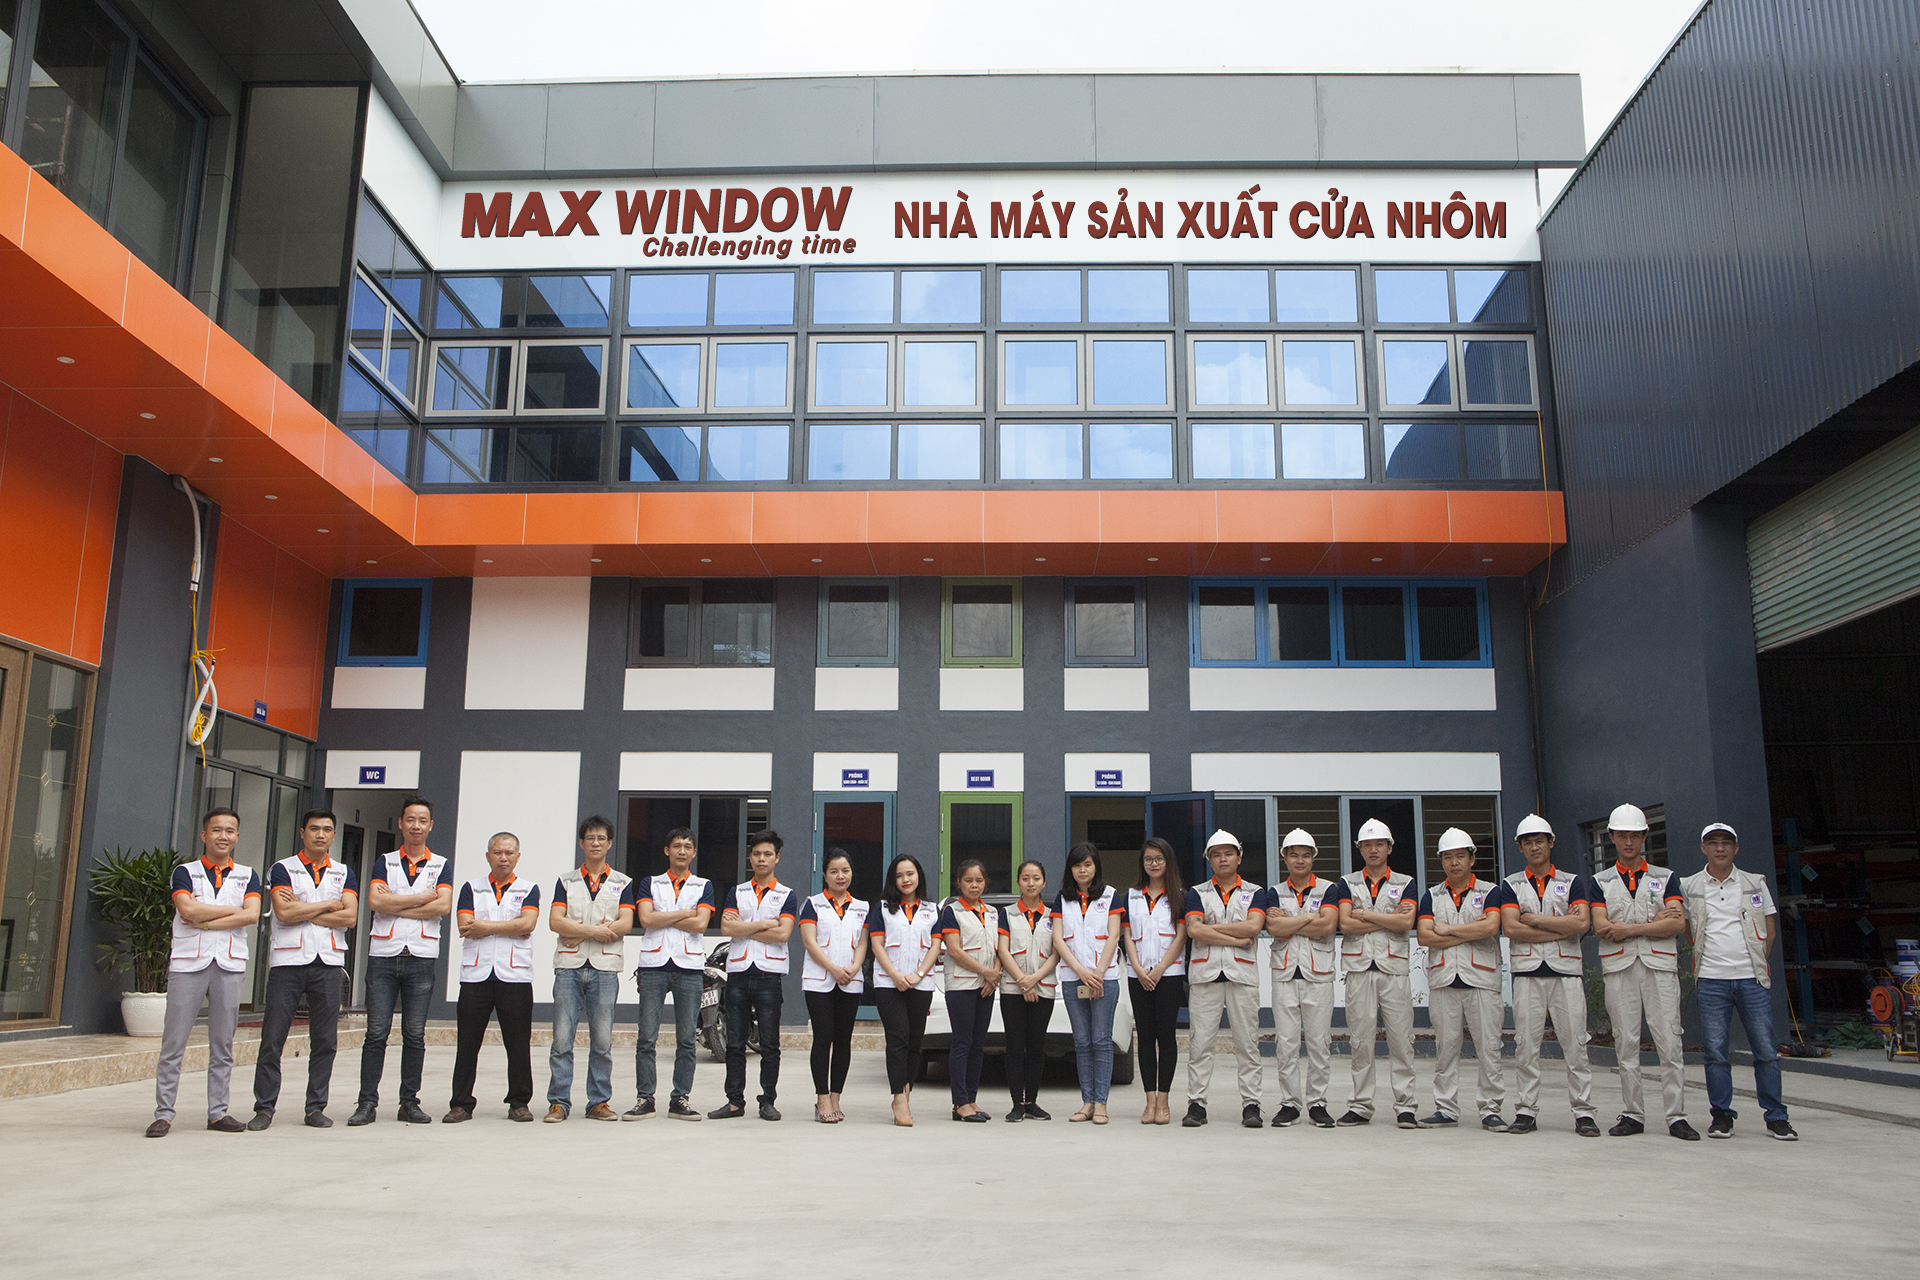 About Max Window Company Limited